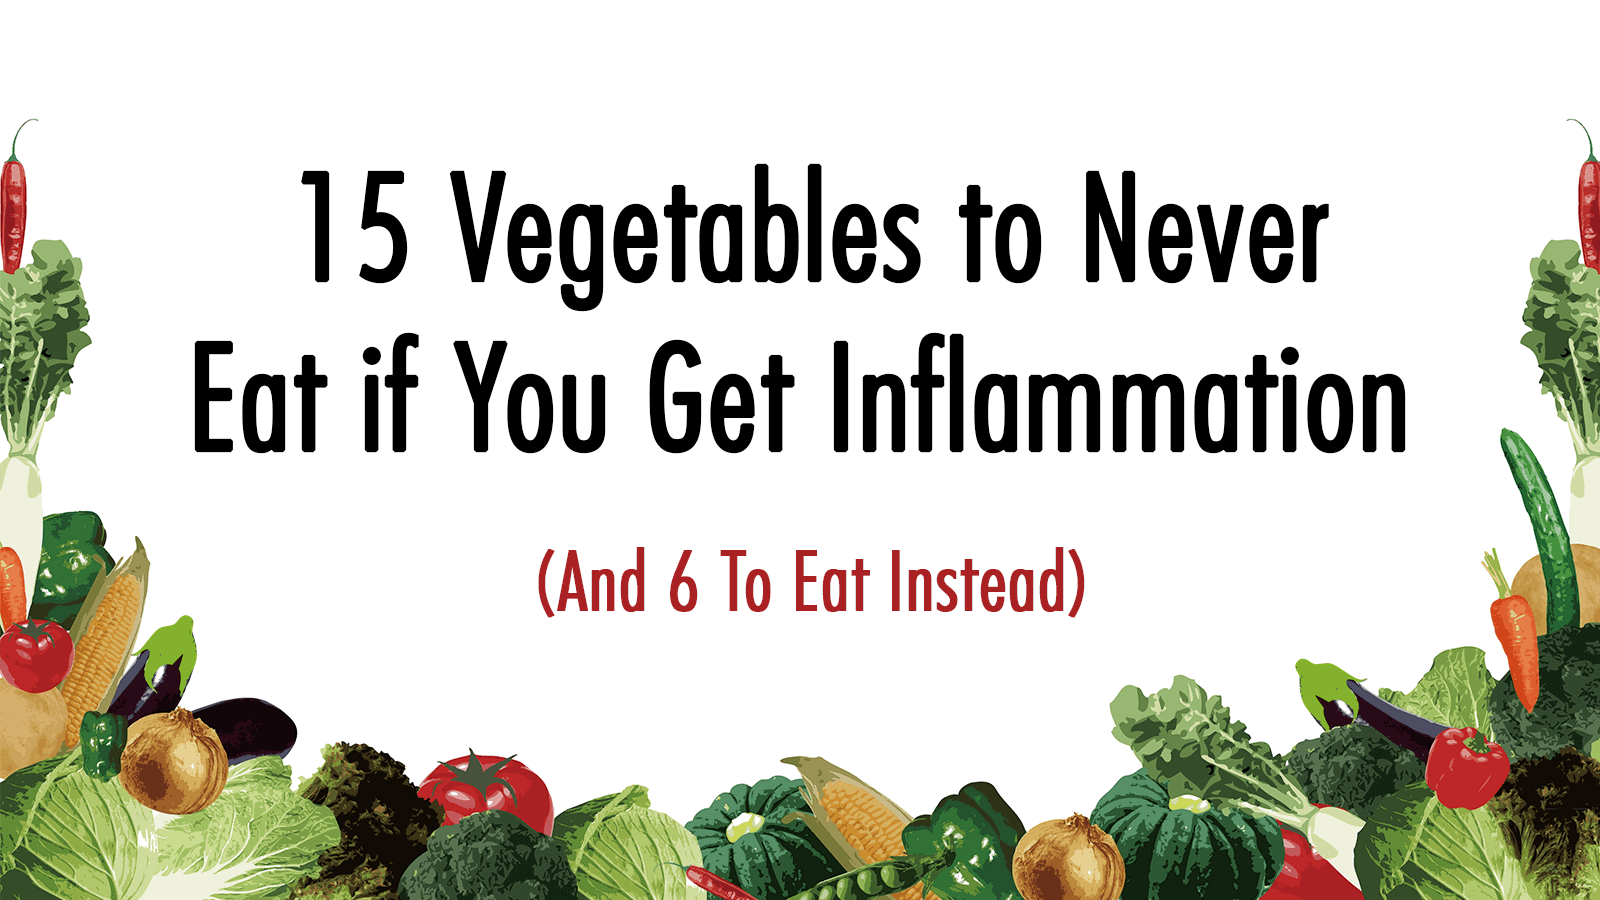 15 Vegetables to Never Eat if You Get Inflammation (And 6 To Eat Instead)